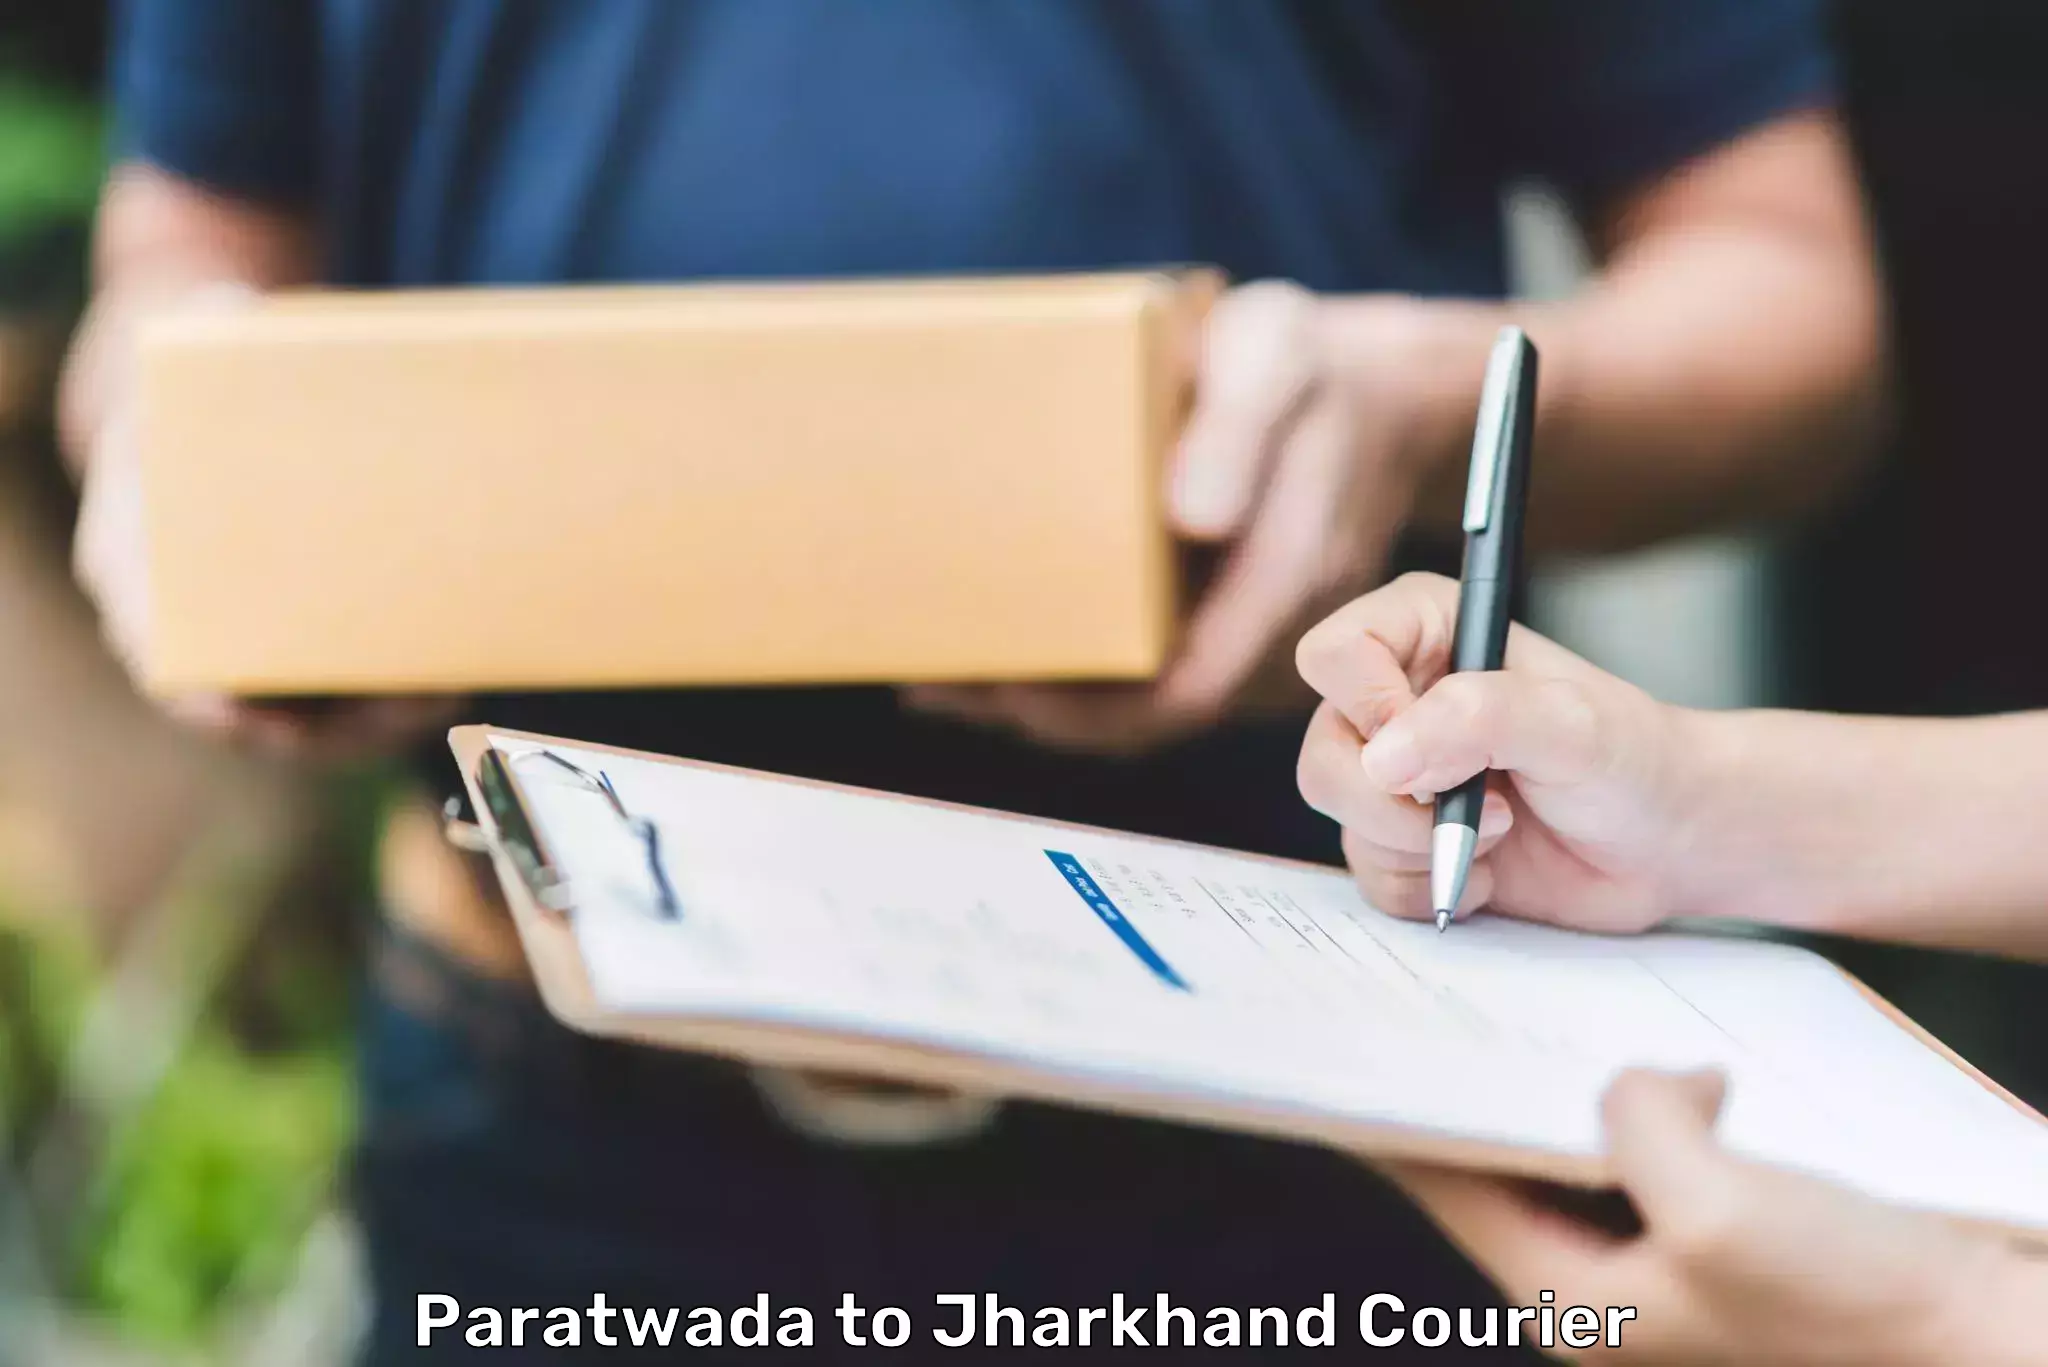 Air courier services Paratwada to Jamshedpur